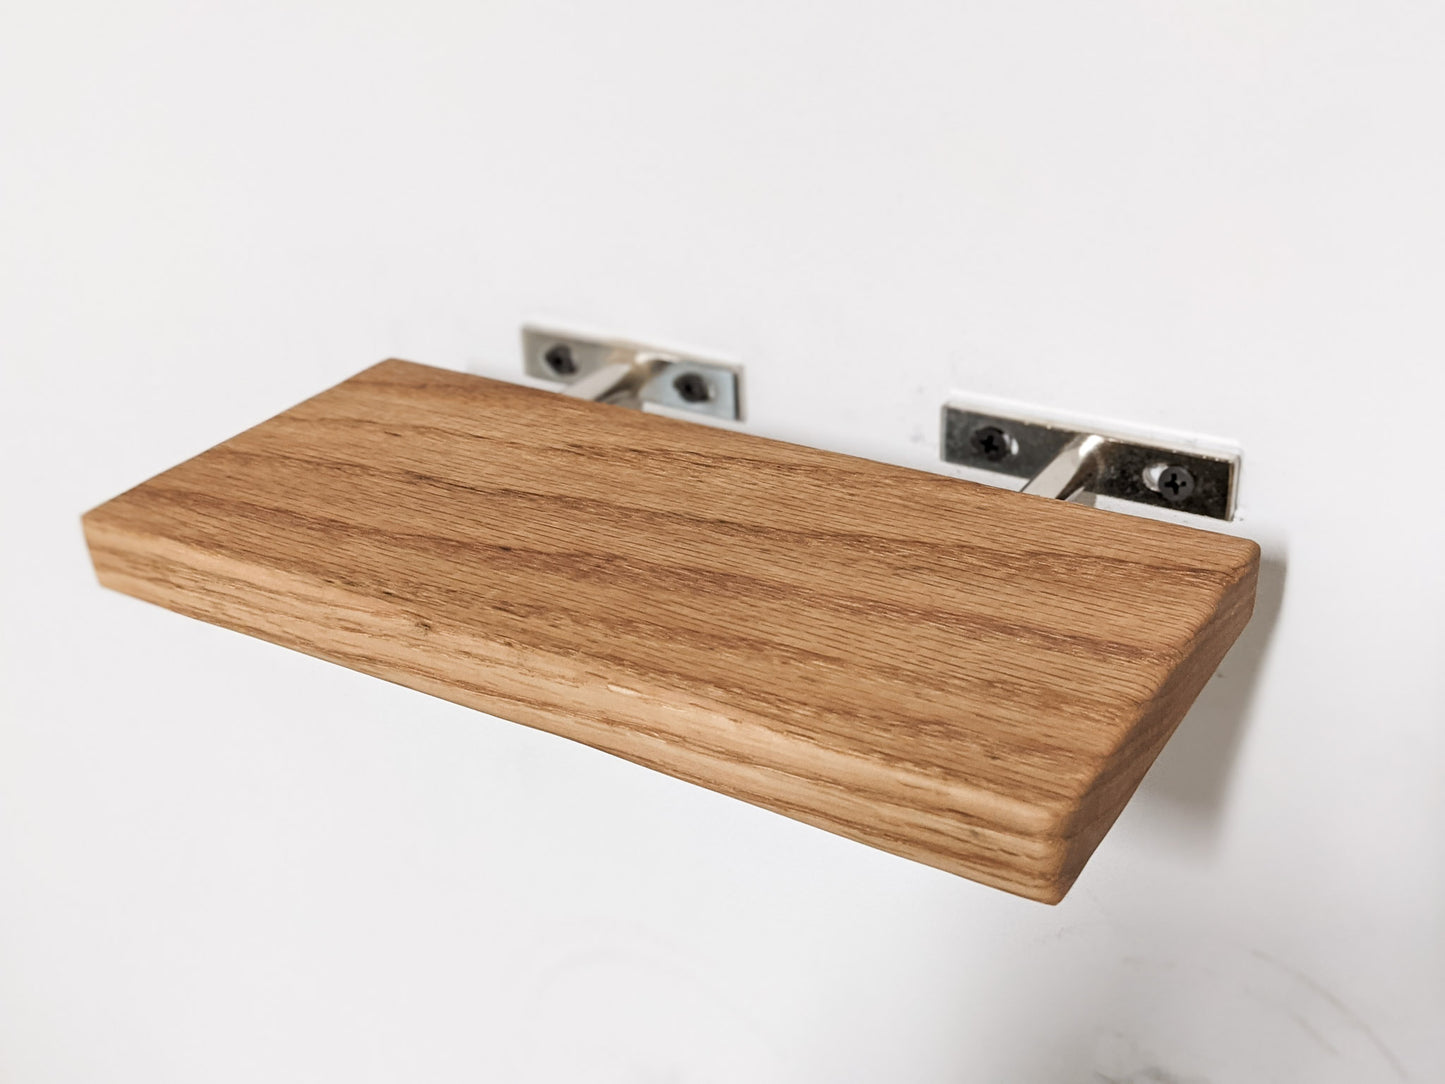 A minimalist oak wooden floating shelf is easily installed with two silver rods for a clean and invisible floating appearance.